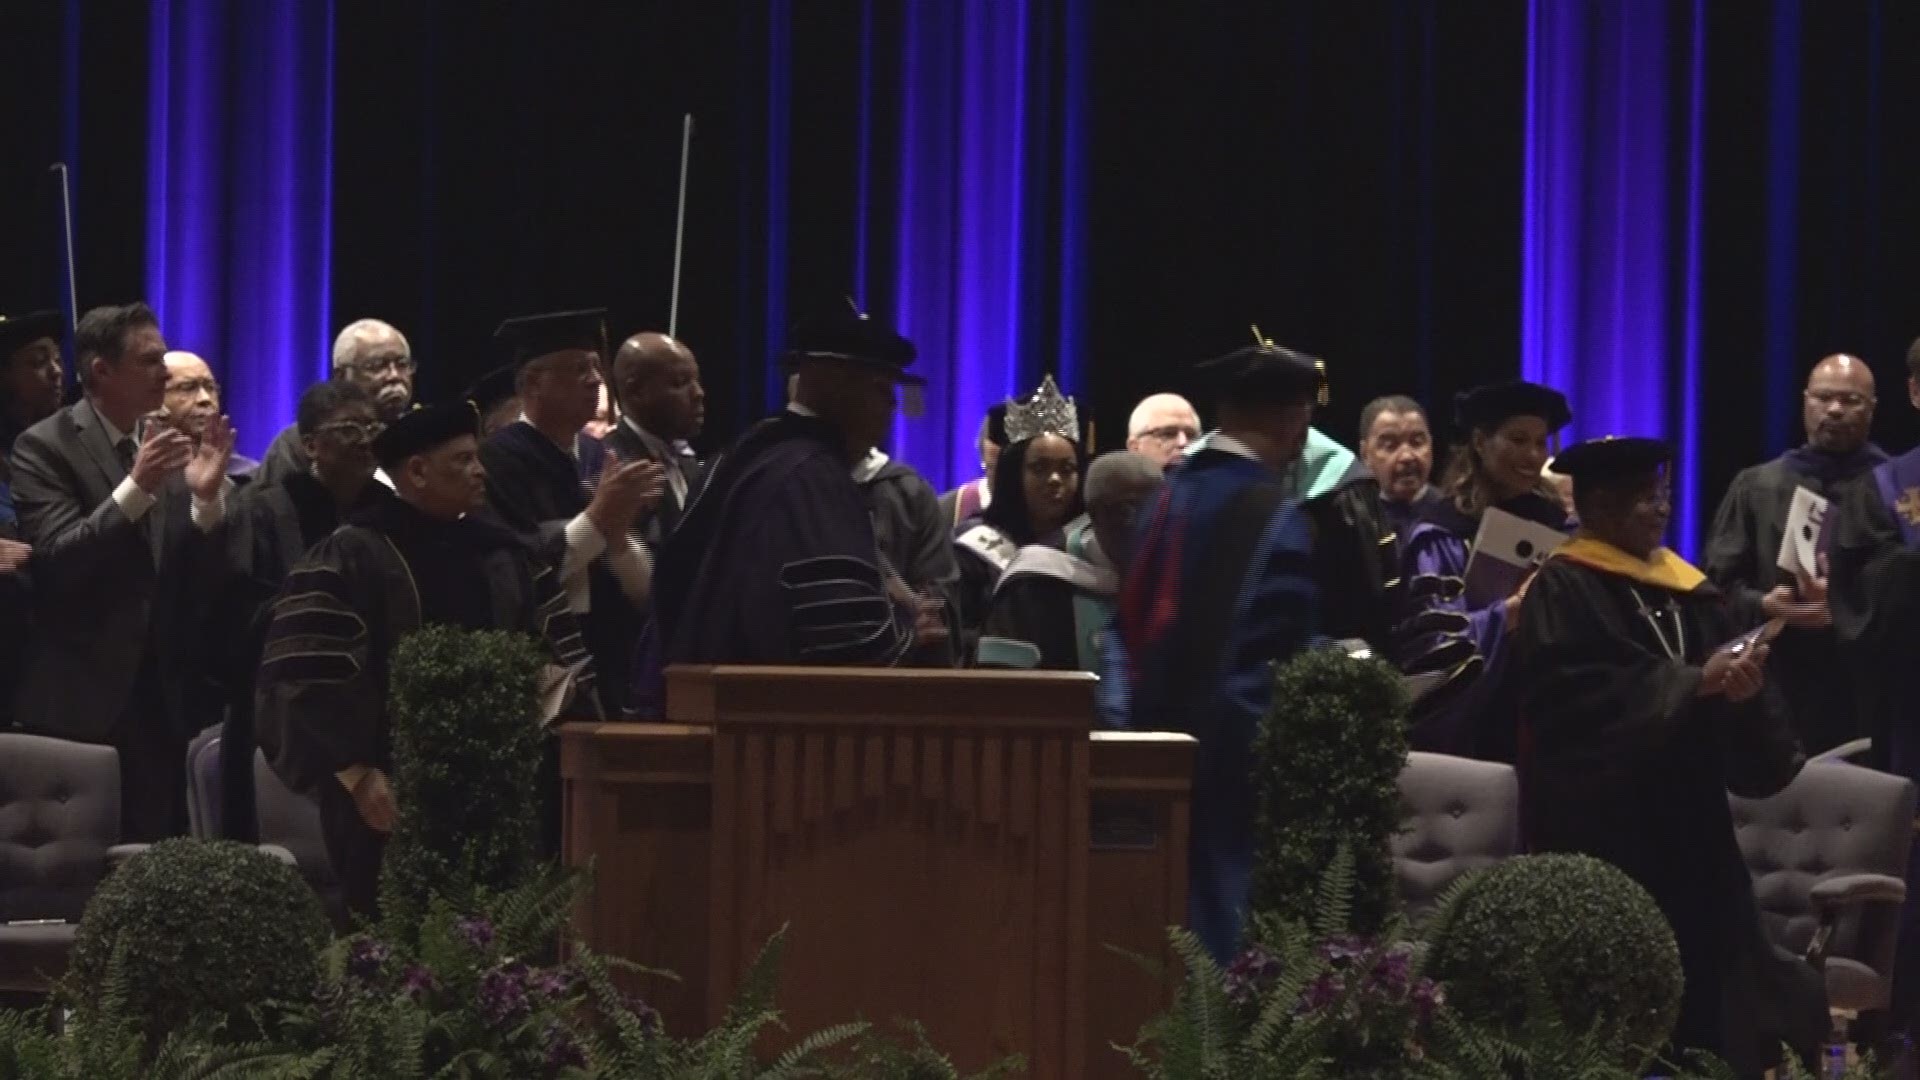 Community members, educators and elected officials gathered to honor the 17th president of Wiley College